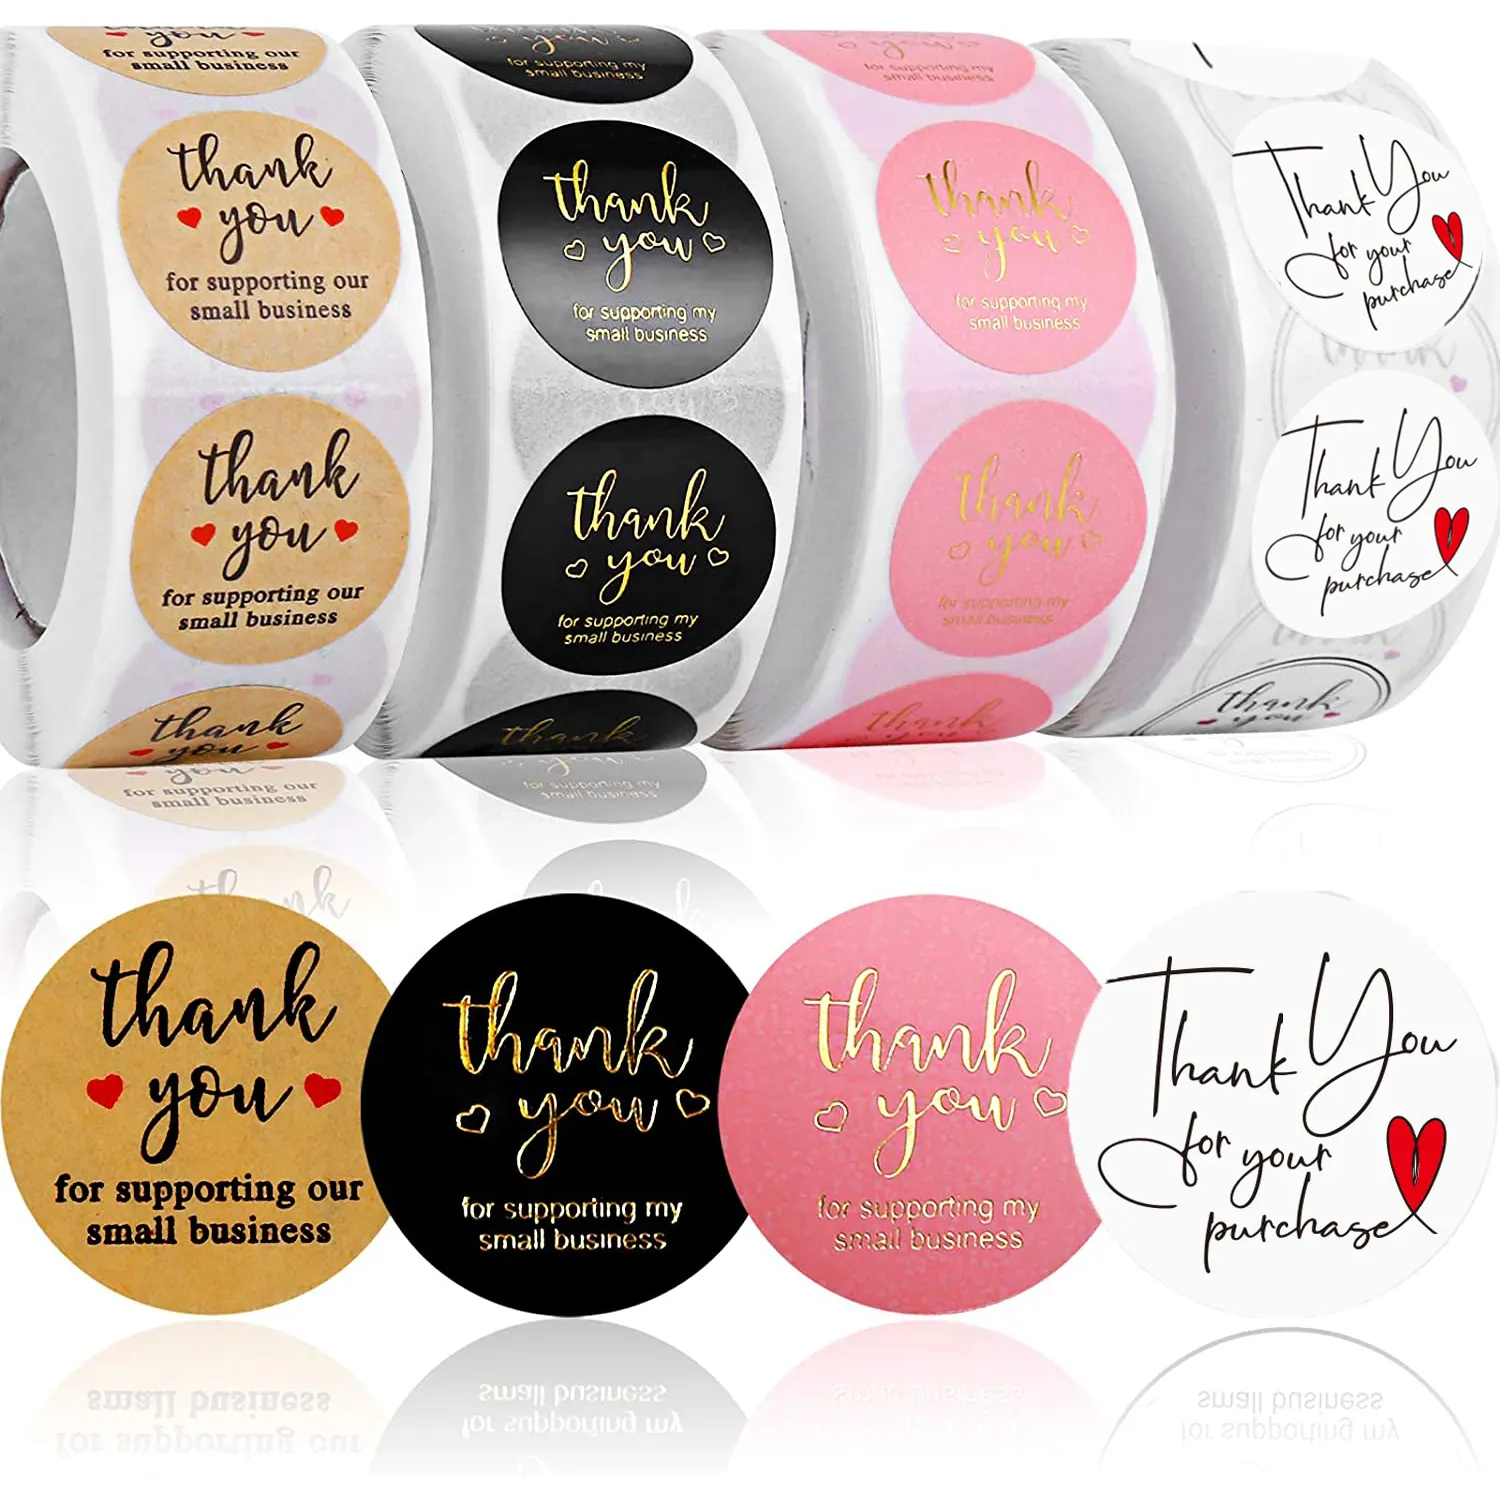 Make Your Own Thank You Sticker 500 pcs Small Business Thank You Sticker Flower Packaging Label For Custom Sticker